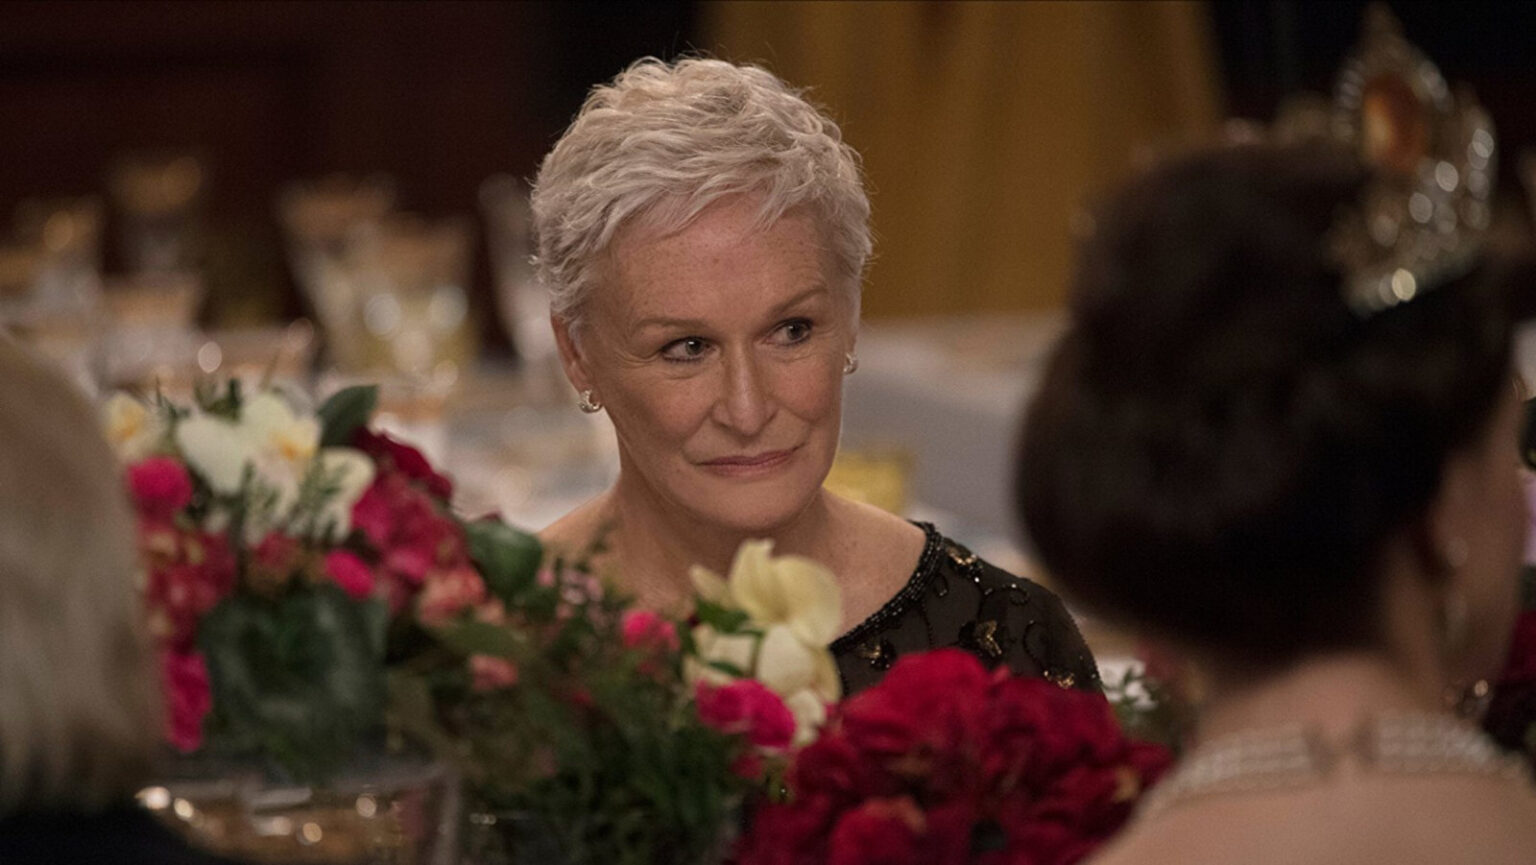 In 'The Me You Can't See', Glenn Close gets candid about being raised in 'Moral Re-Armament'. Find out more about her experiences right here.